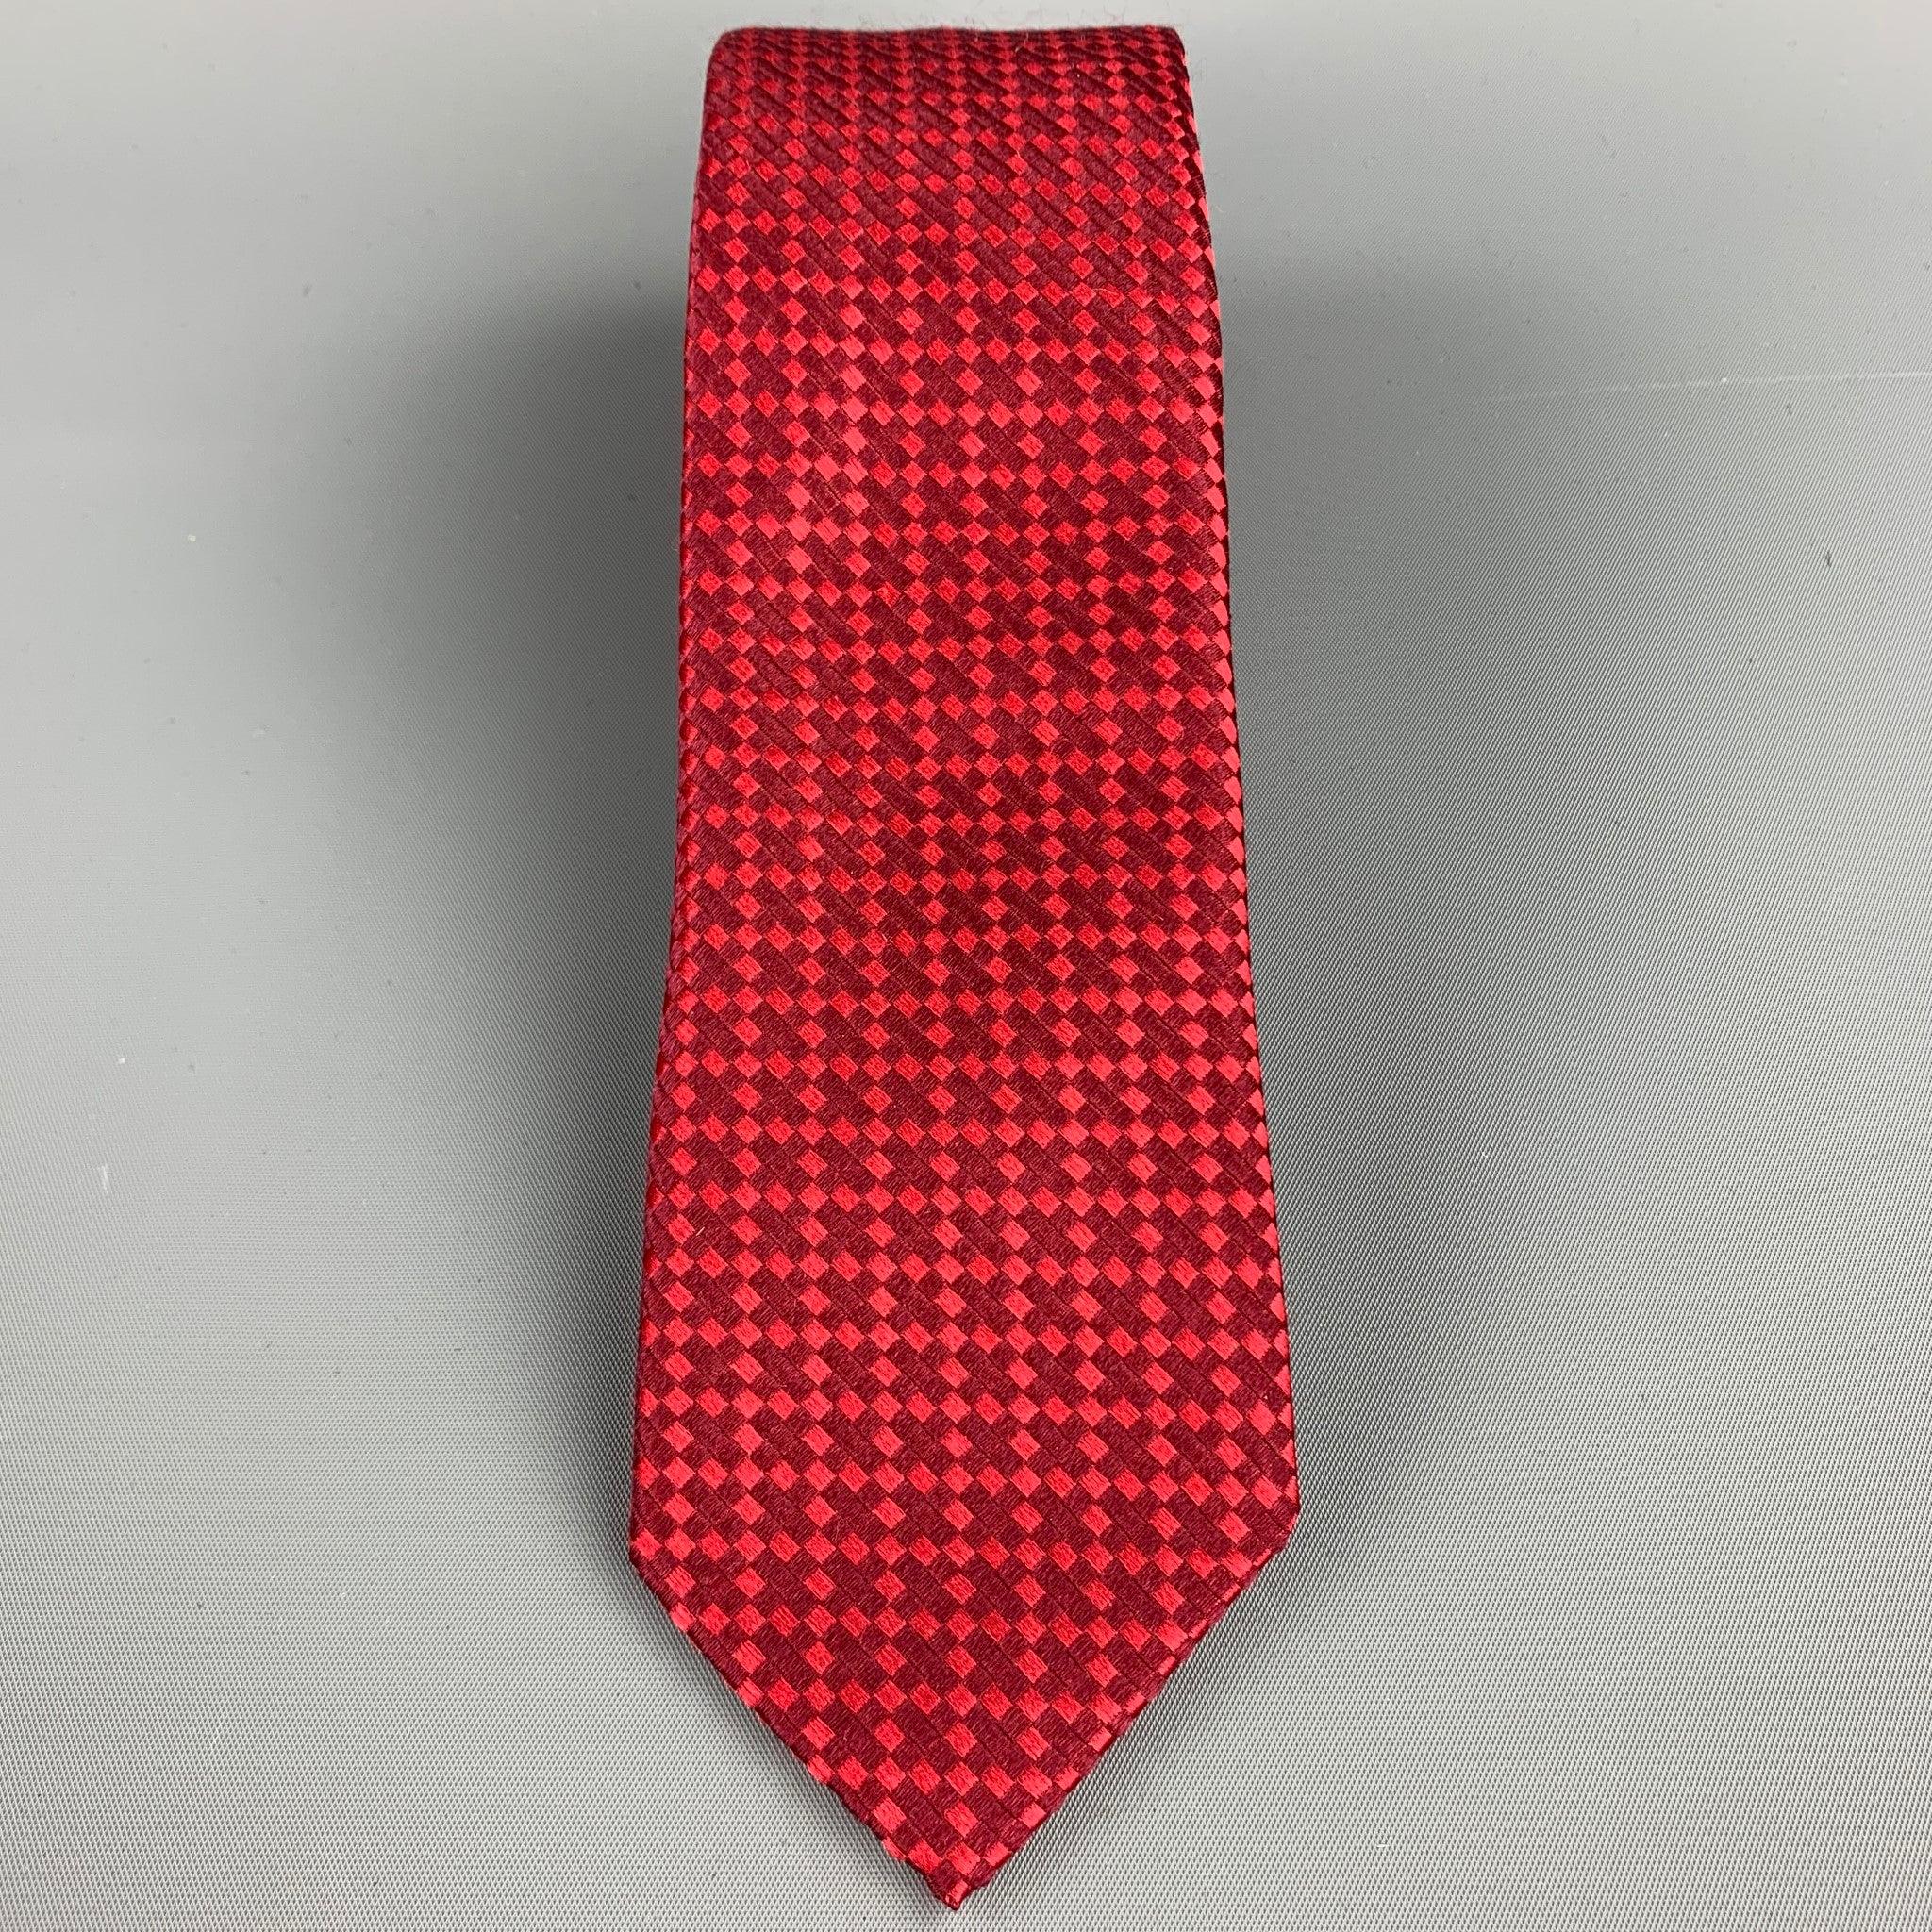 CHRISTIAN LACROIX neck tie comes in a red diamond print silk. Made in Italy.
Very Good Pre-Owned Condition.
Width: 2.5 inches  
  
  
 
Reference: 106628
Category: Tie
More Details
    
Brand:  CHRISTIAN LACROIX 
Color:  Red
Pattern: 